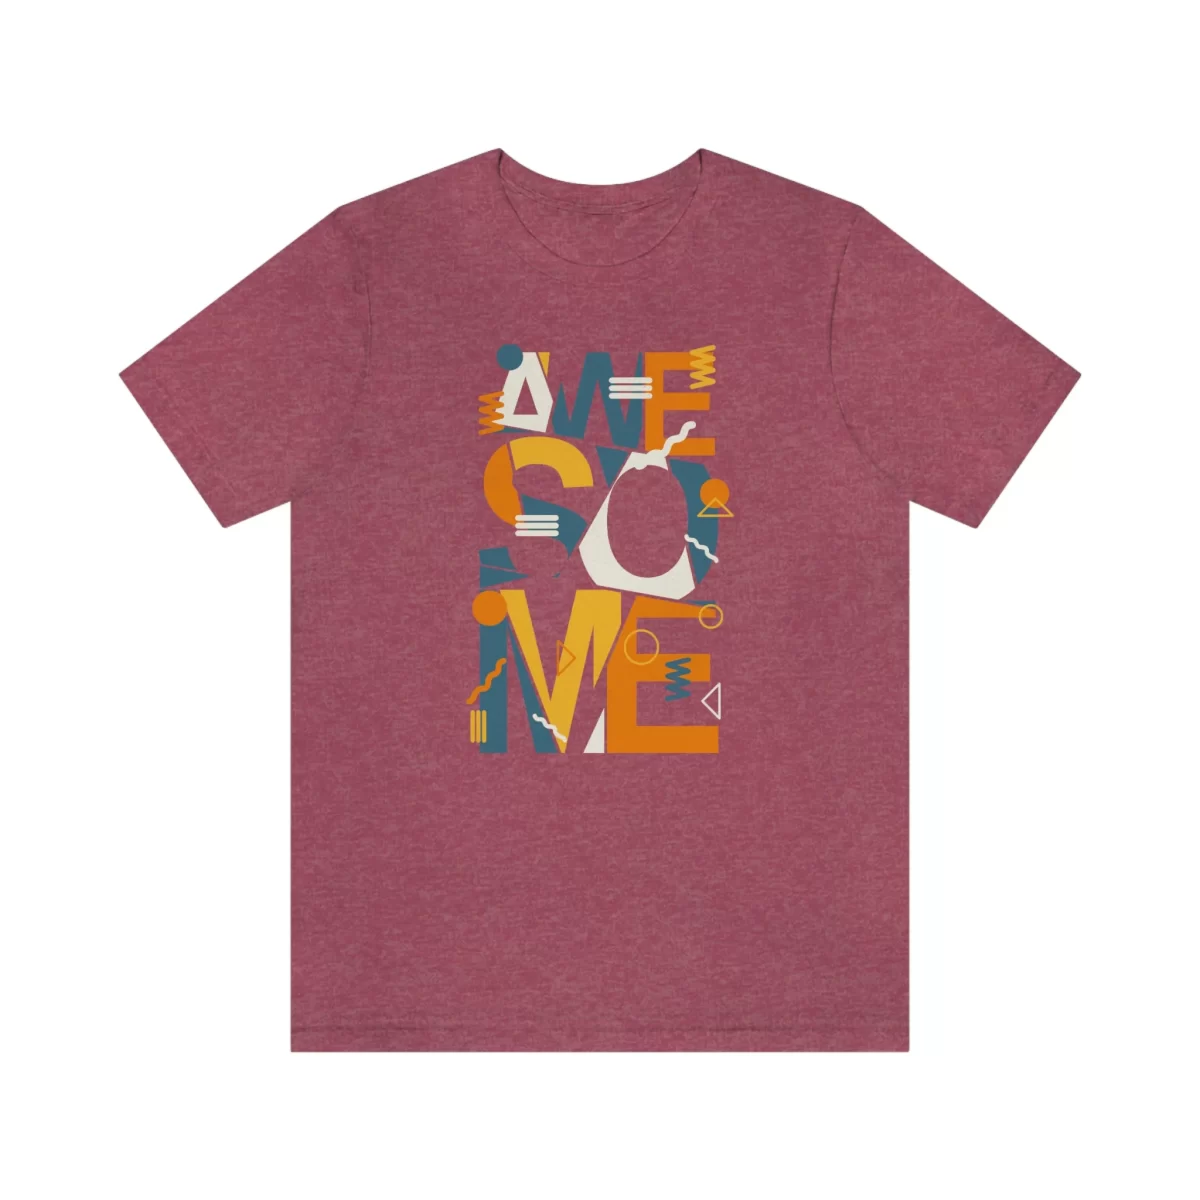 Unisex T Shirt Awesome Heather Raspberry Front